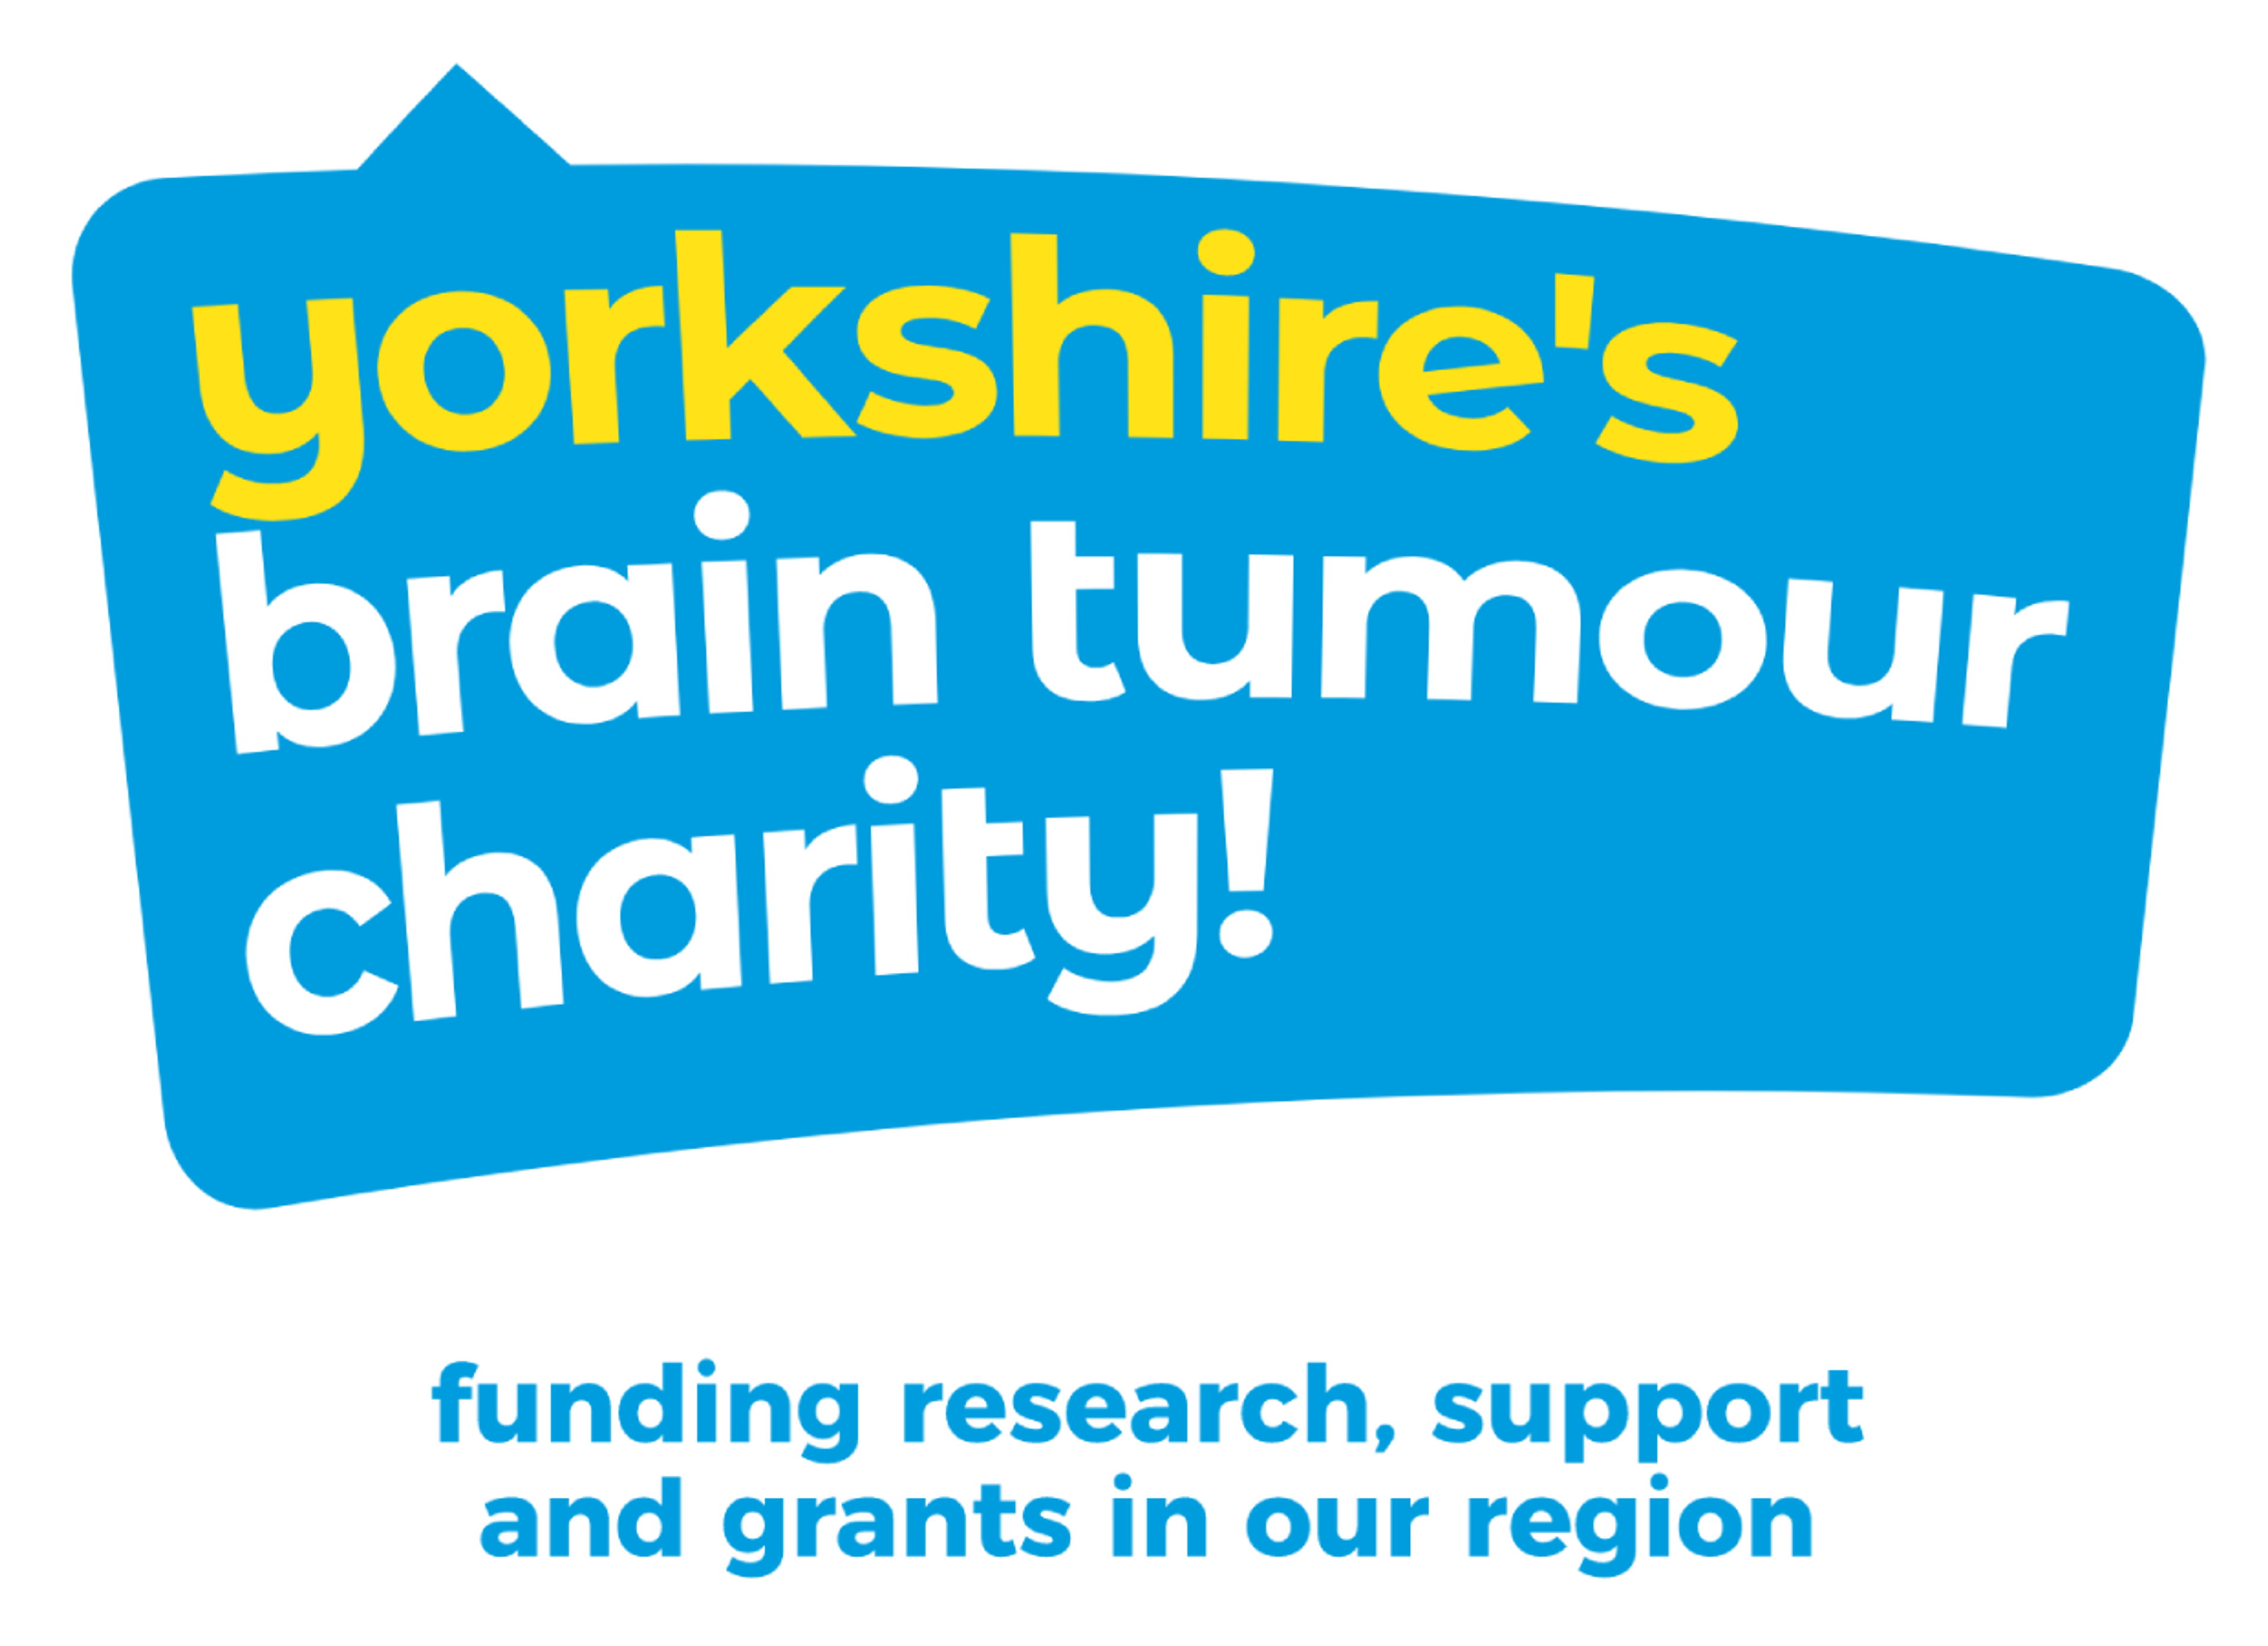 Logo for Yorkshire's brain tumour charity